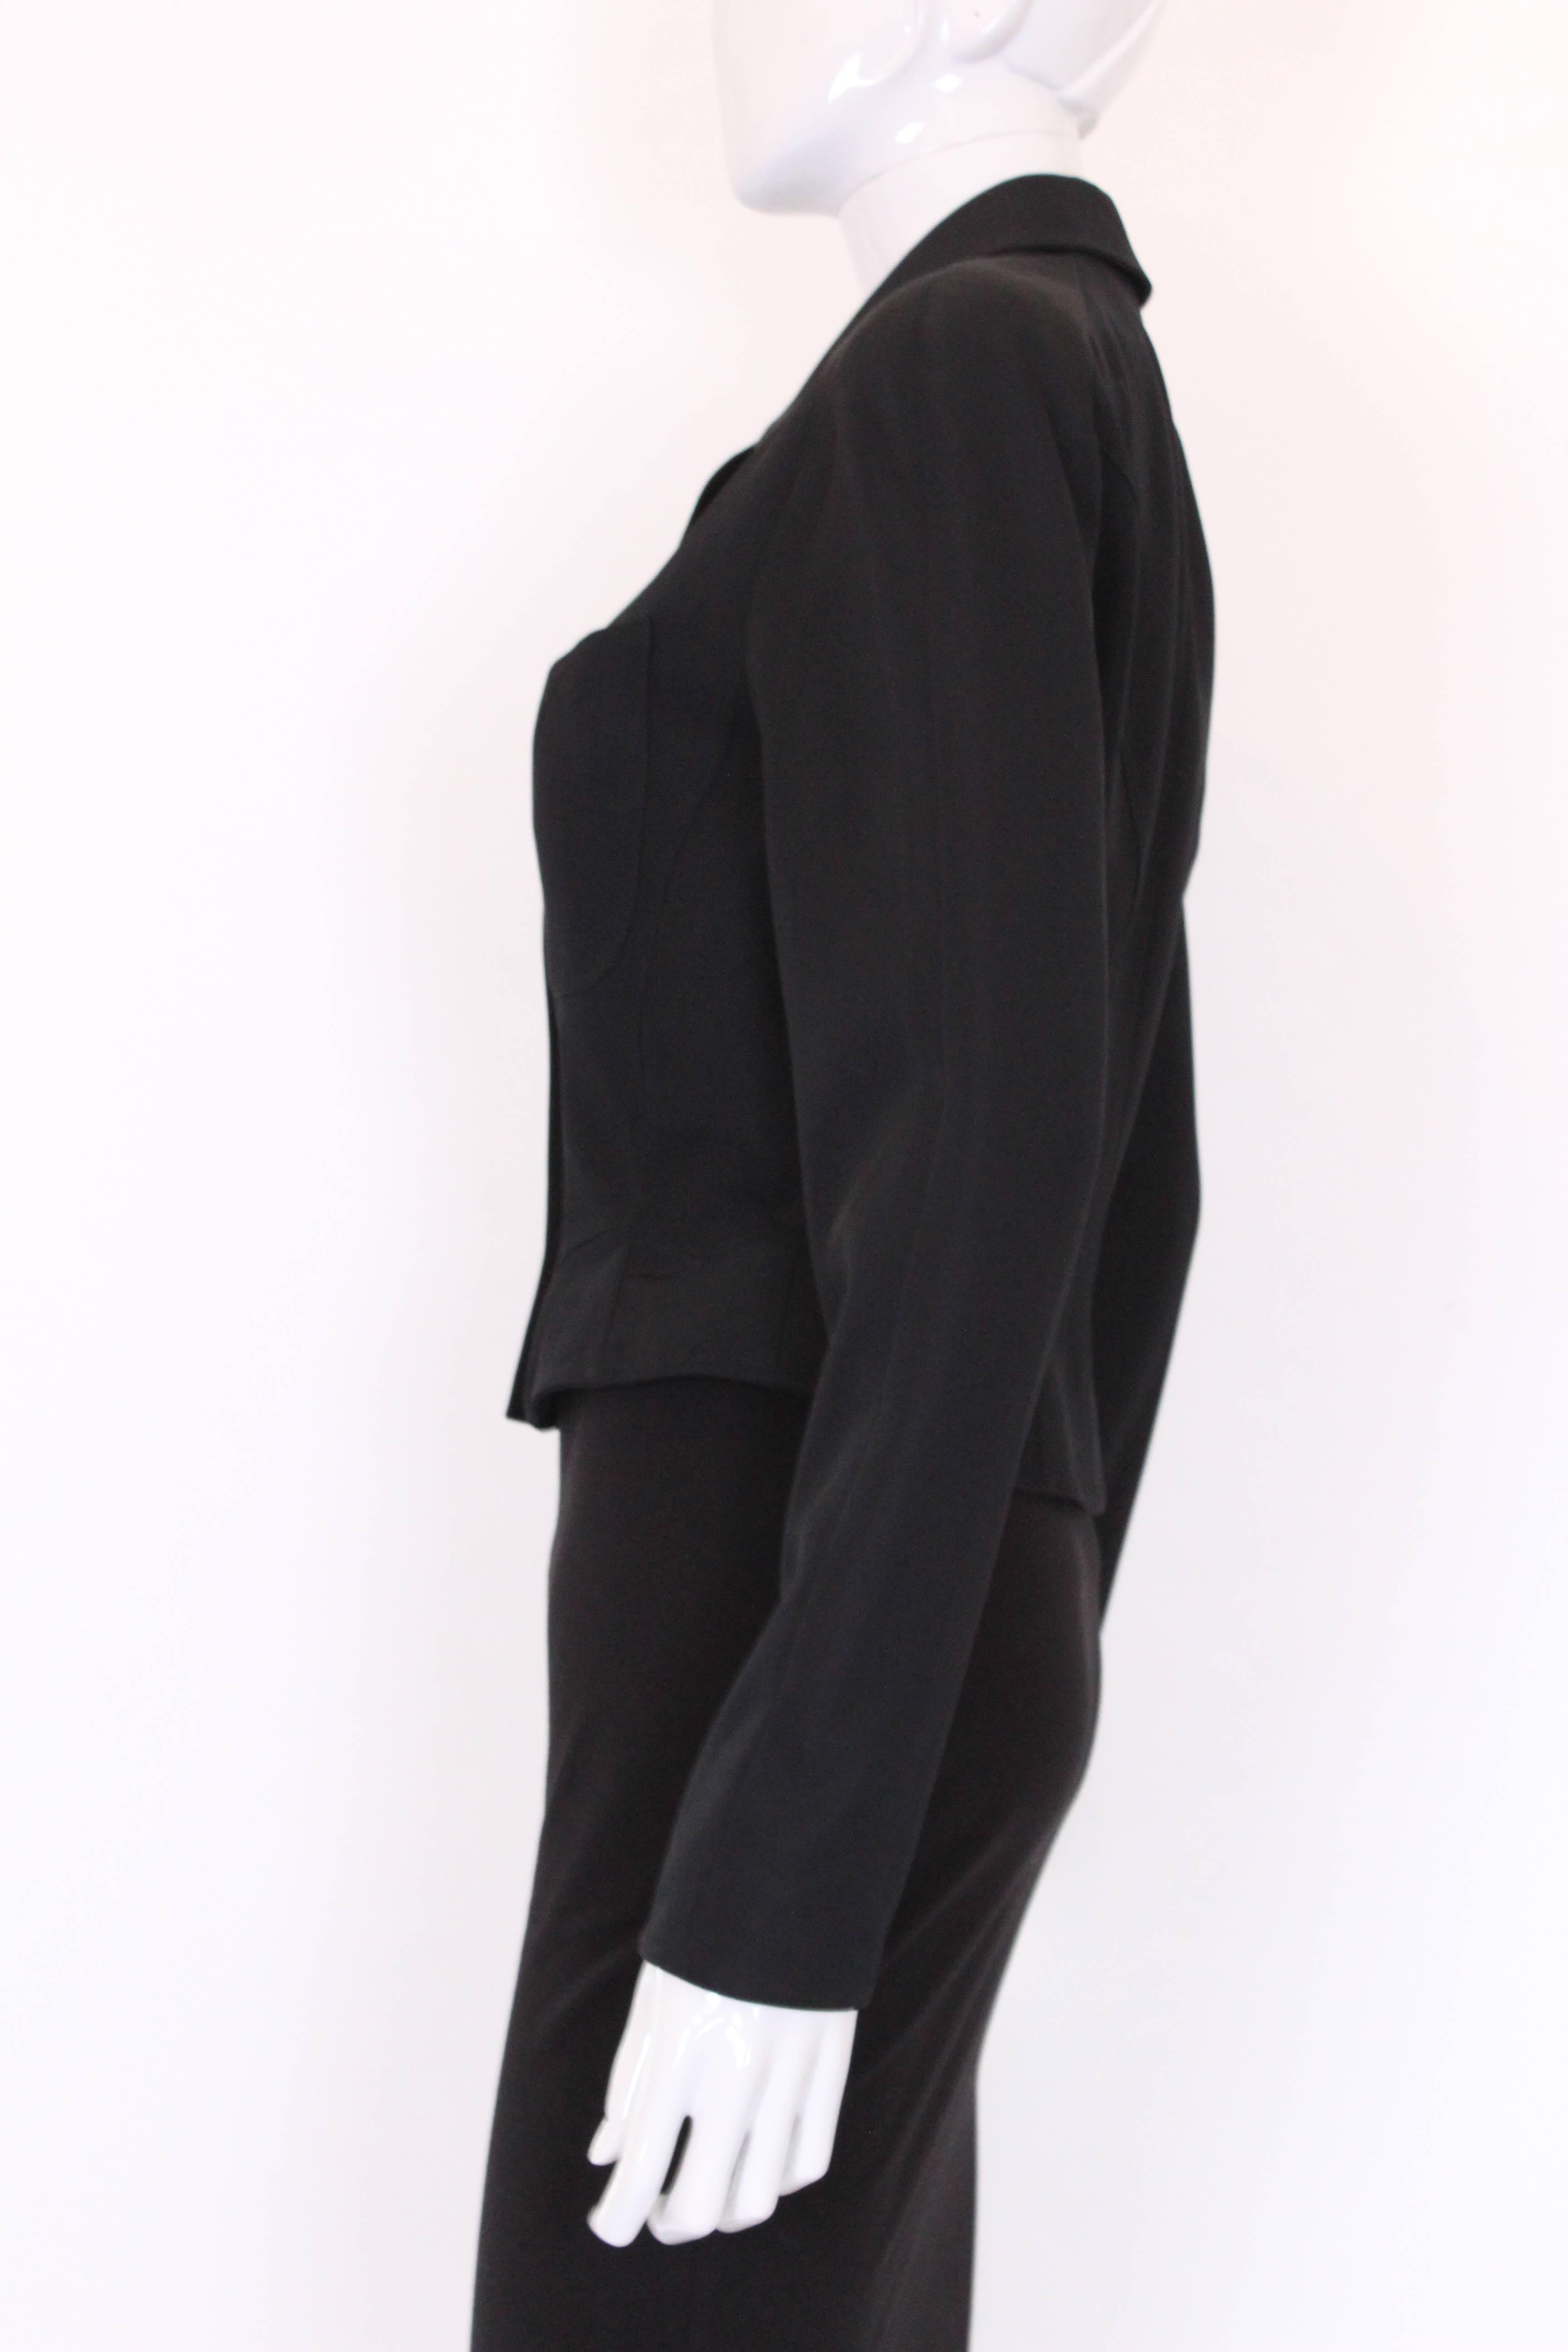 Women's Late 1980s Black Thierry Mugler Structured Jacket